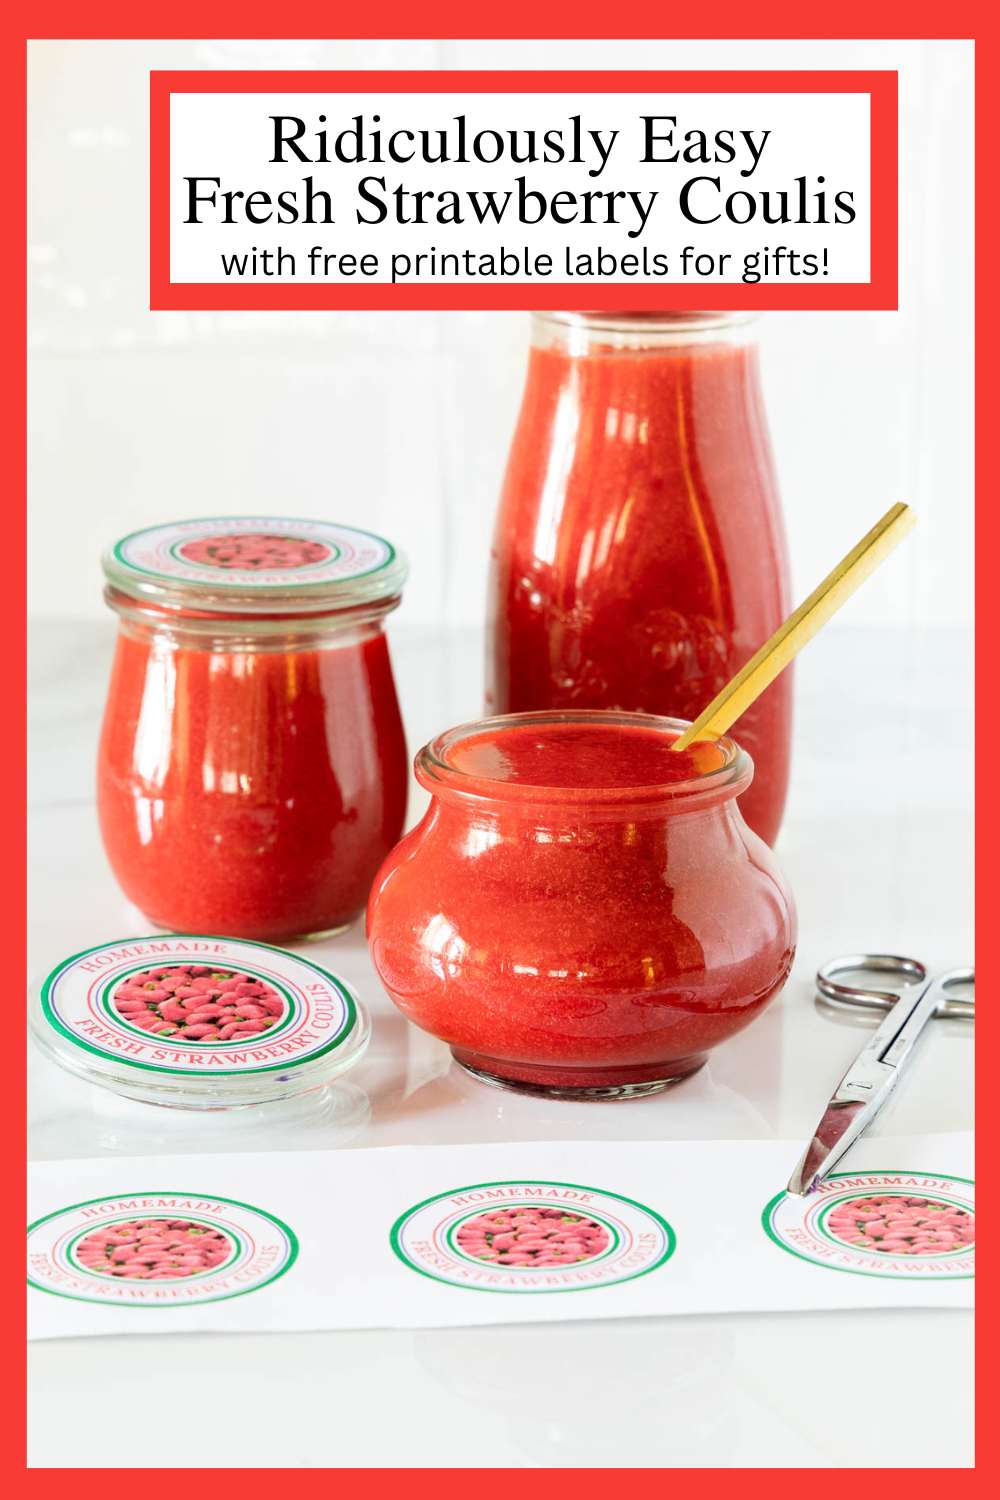 Ridiculously Easy Strawberry Coulis (with free printable labels for gifts)